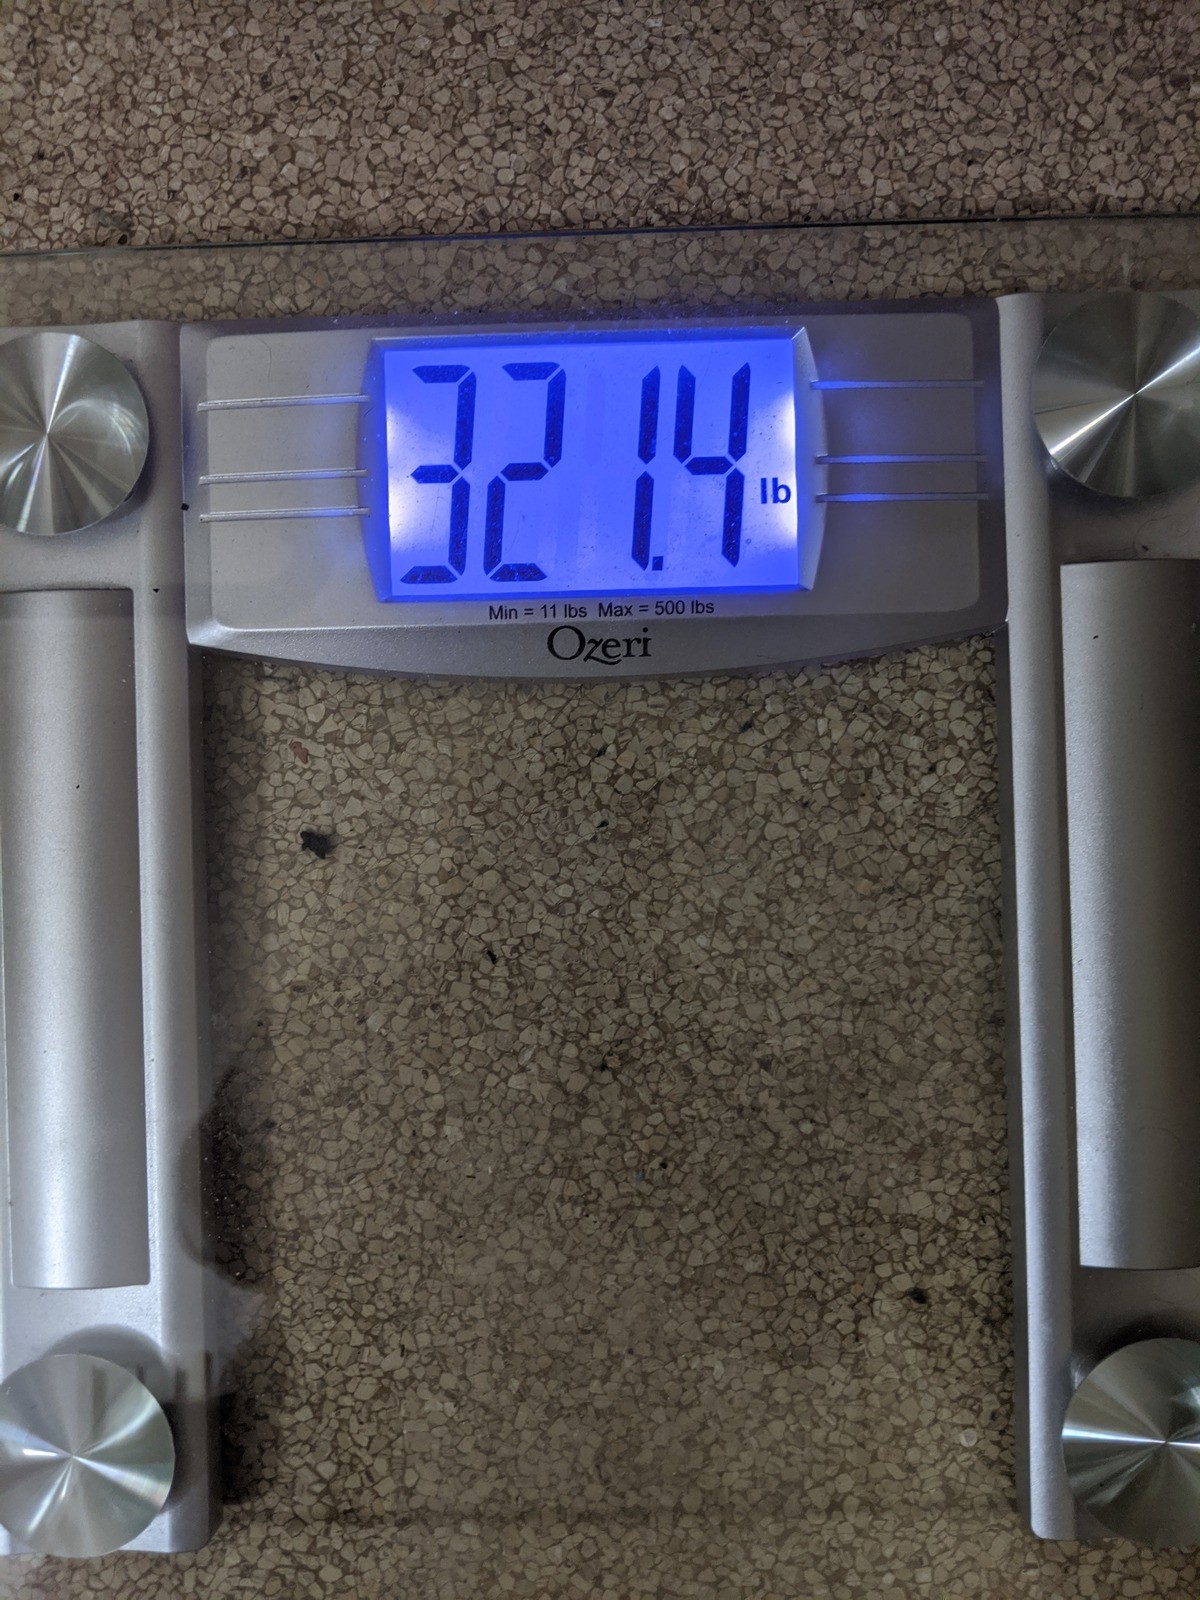 May 2020 weight loss update. join list: WeightlossProgress (169 subs)Mention Clicks: 1097Msgs Sent: 2943Mention History Minor slide back this month but I pushed